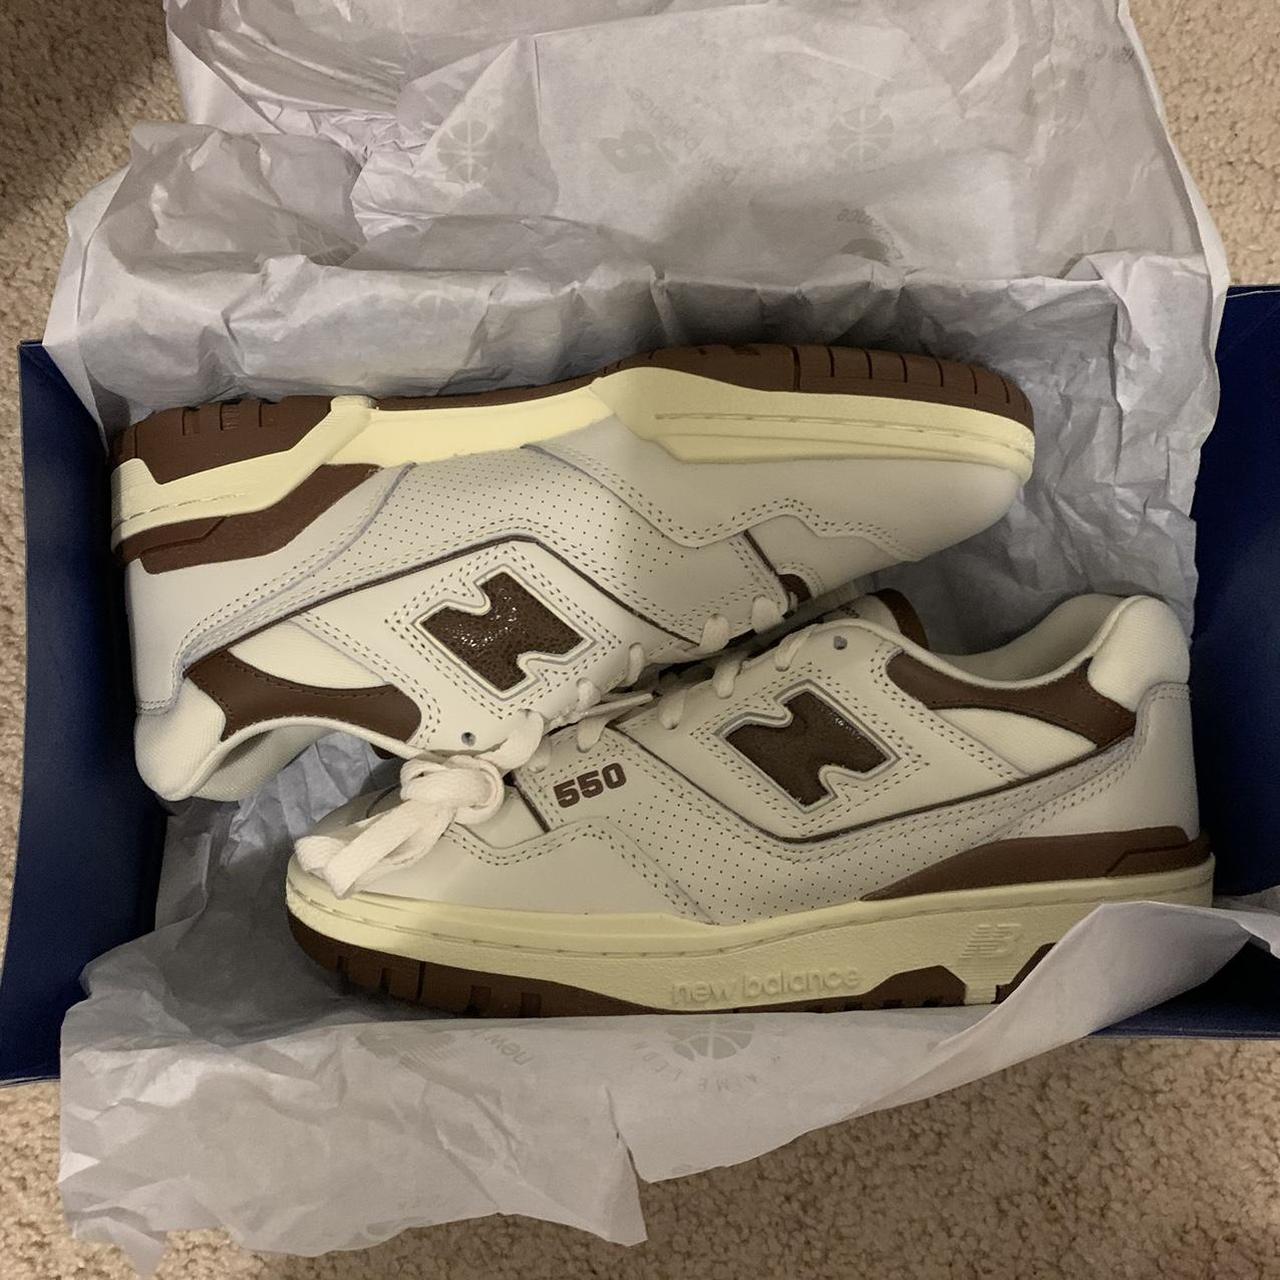 New Balance Women's White and Brown Trainers (2)